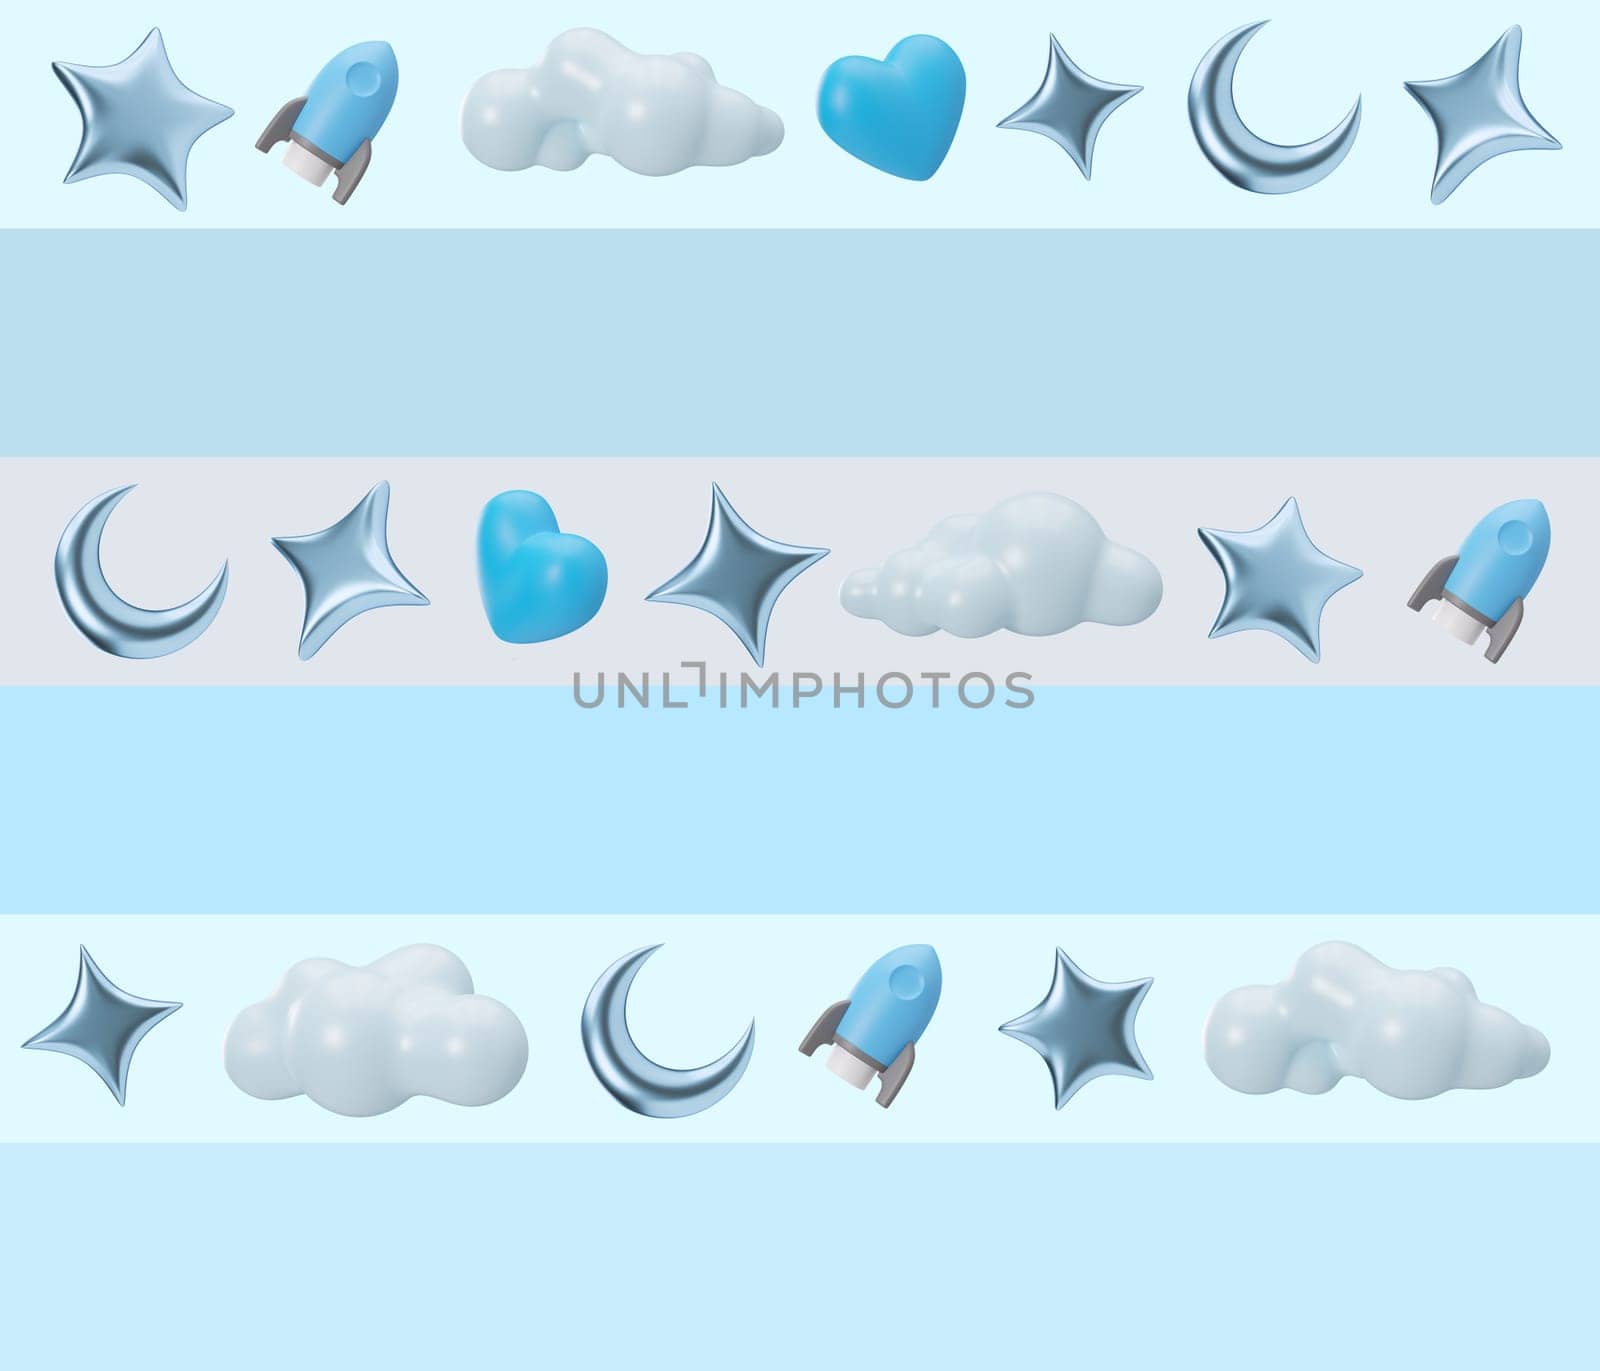 Blue seamless pattern with stars, moons and rockets. Applicable for fabric print, textile, wallpaper, gifts wrapping paper. Repeatable texture. Modern style, pattern for boys bedding, clothes. 3D